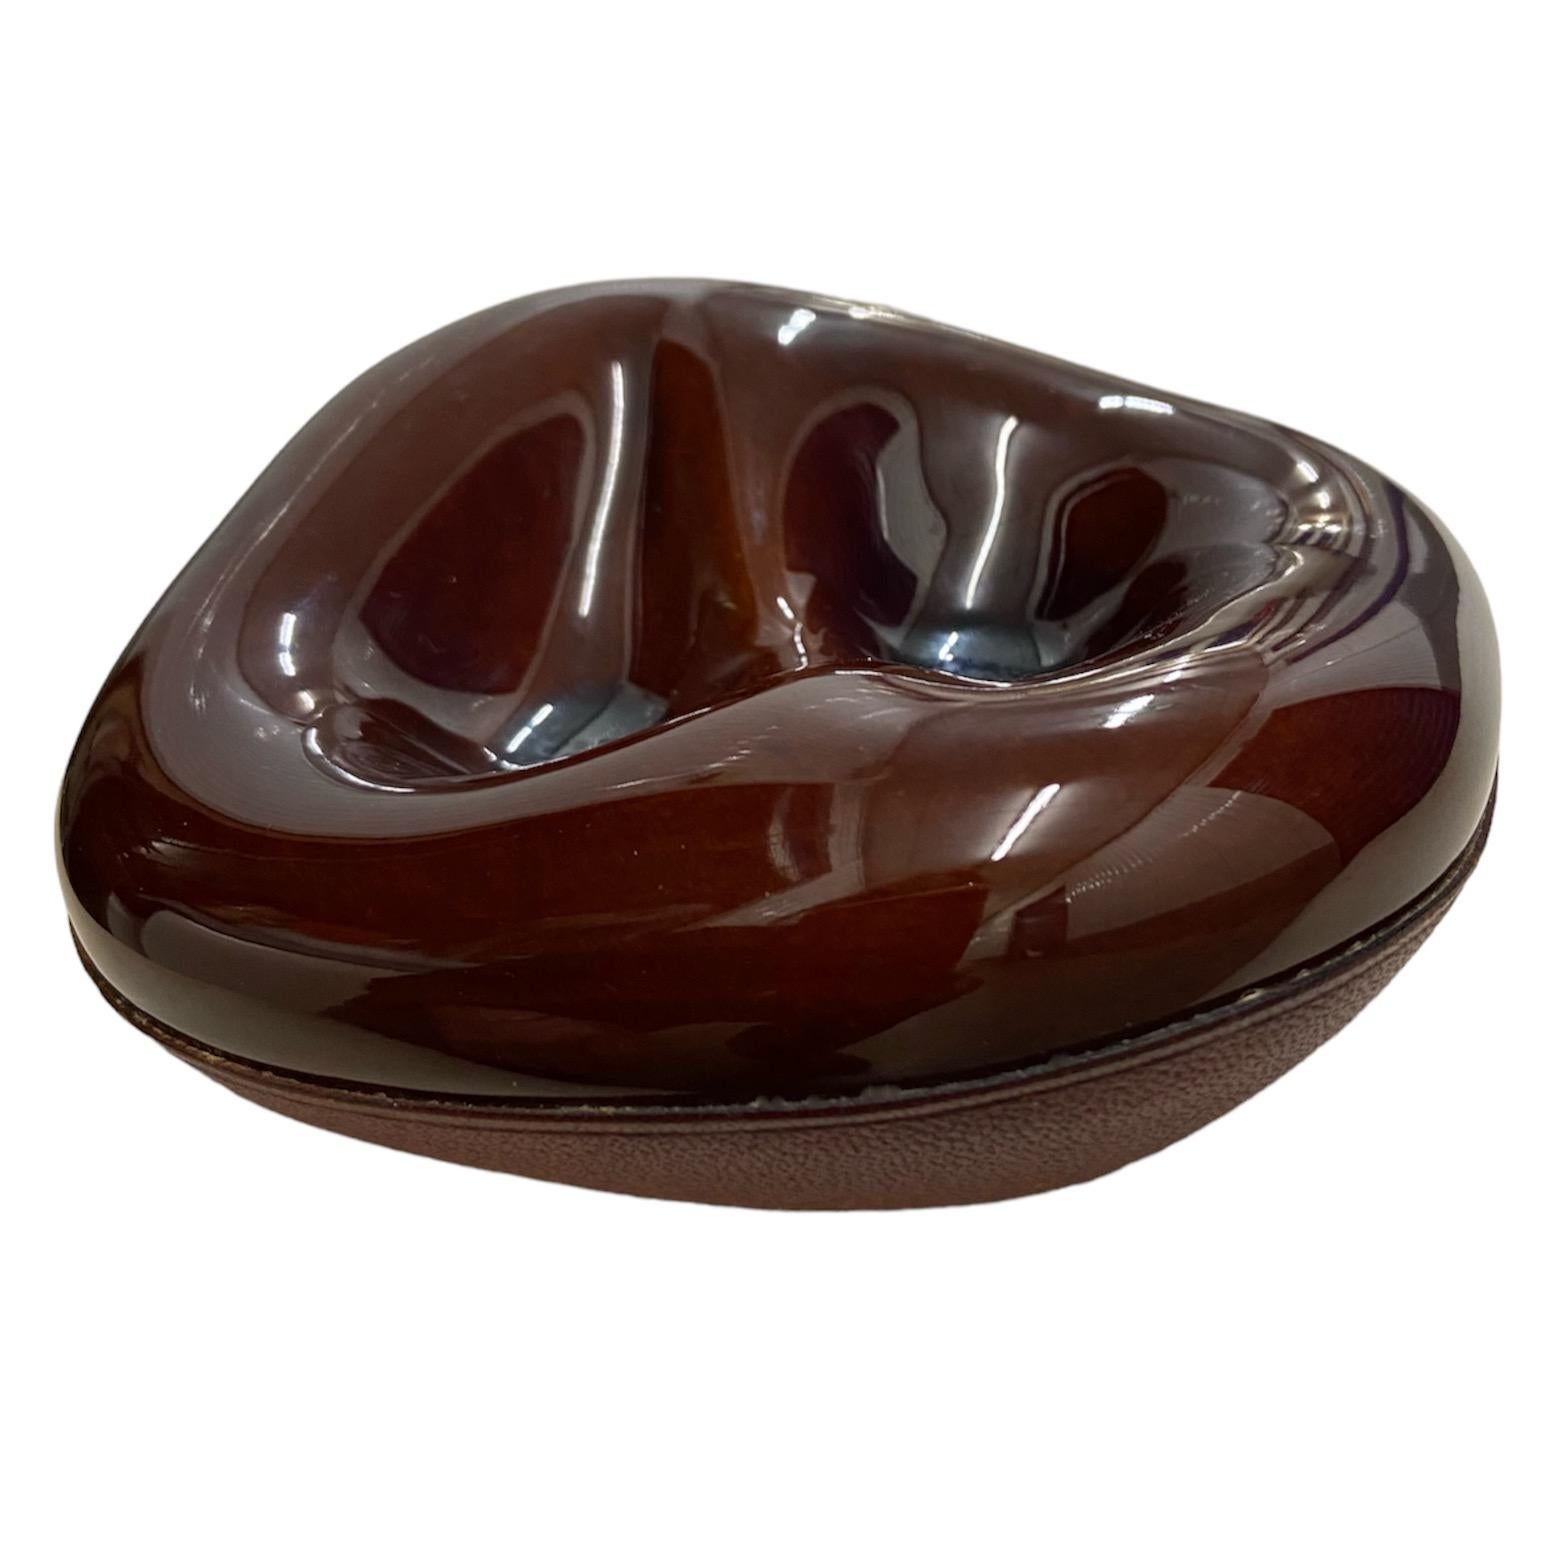 Longchamp leather and ceramic pipe holder, ashtray, stamped, French, circa 1955 For Sale 1